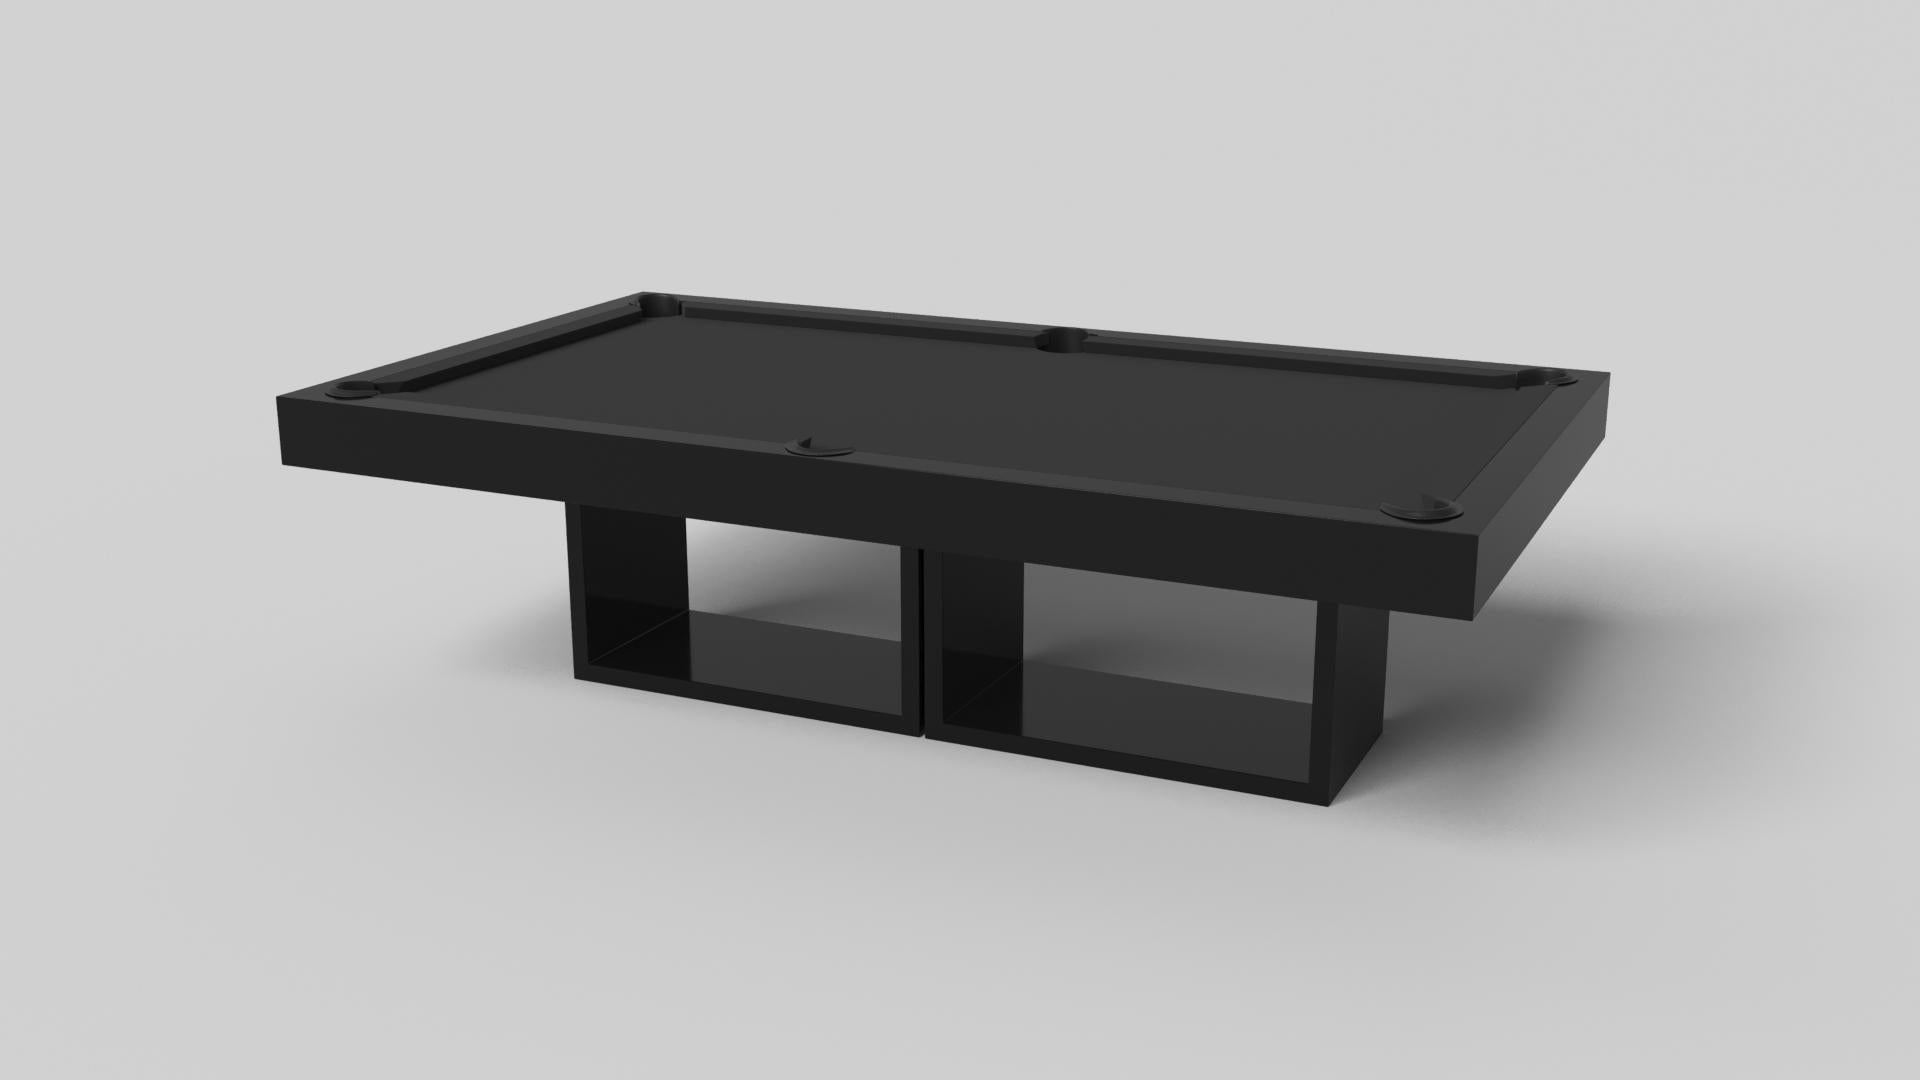 Supported by two rectangular open pedestals as the base, this handcrafted pool table is modern and minimalistic with its combination of simple, geometric forms. Viewed from the front, the use of negative space is evident; viewed from the side, the